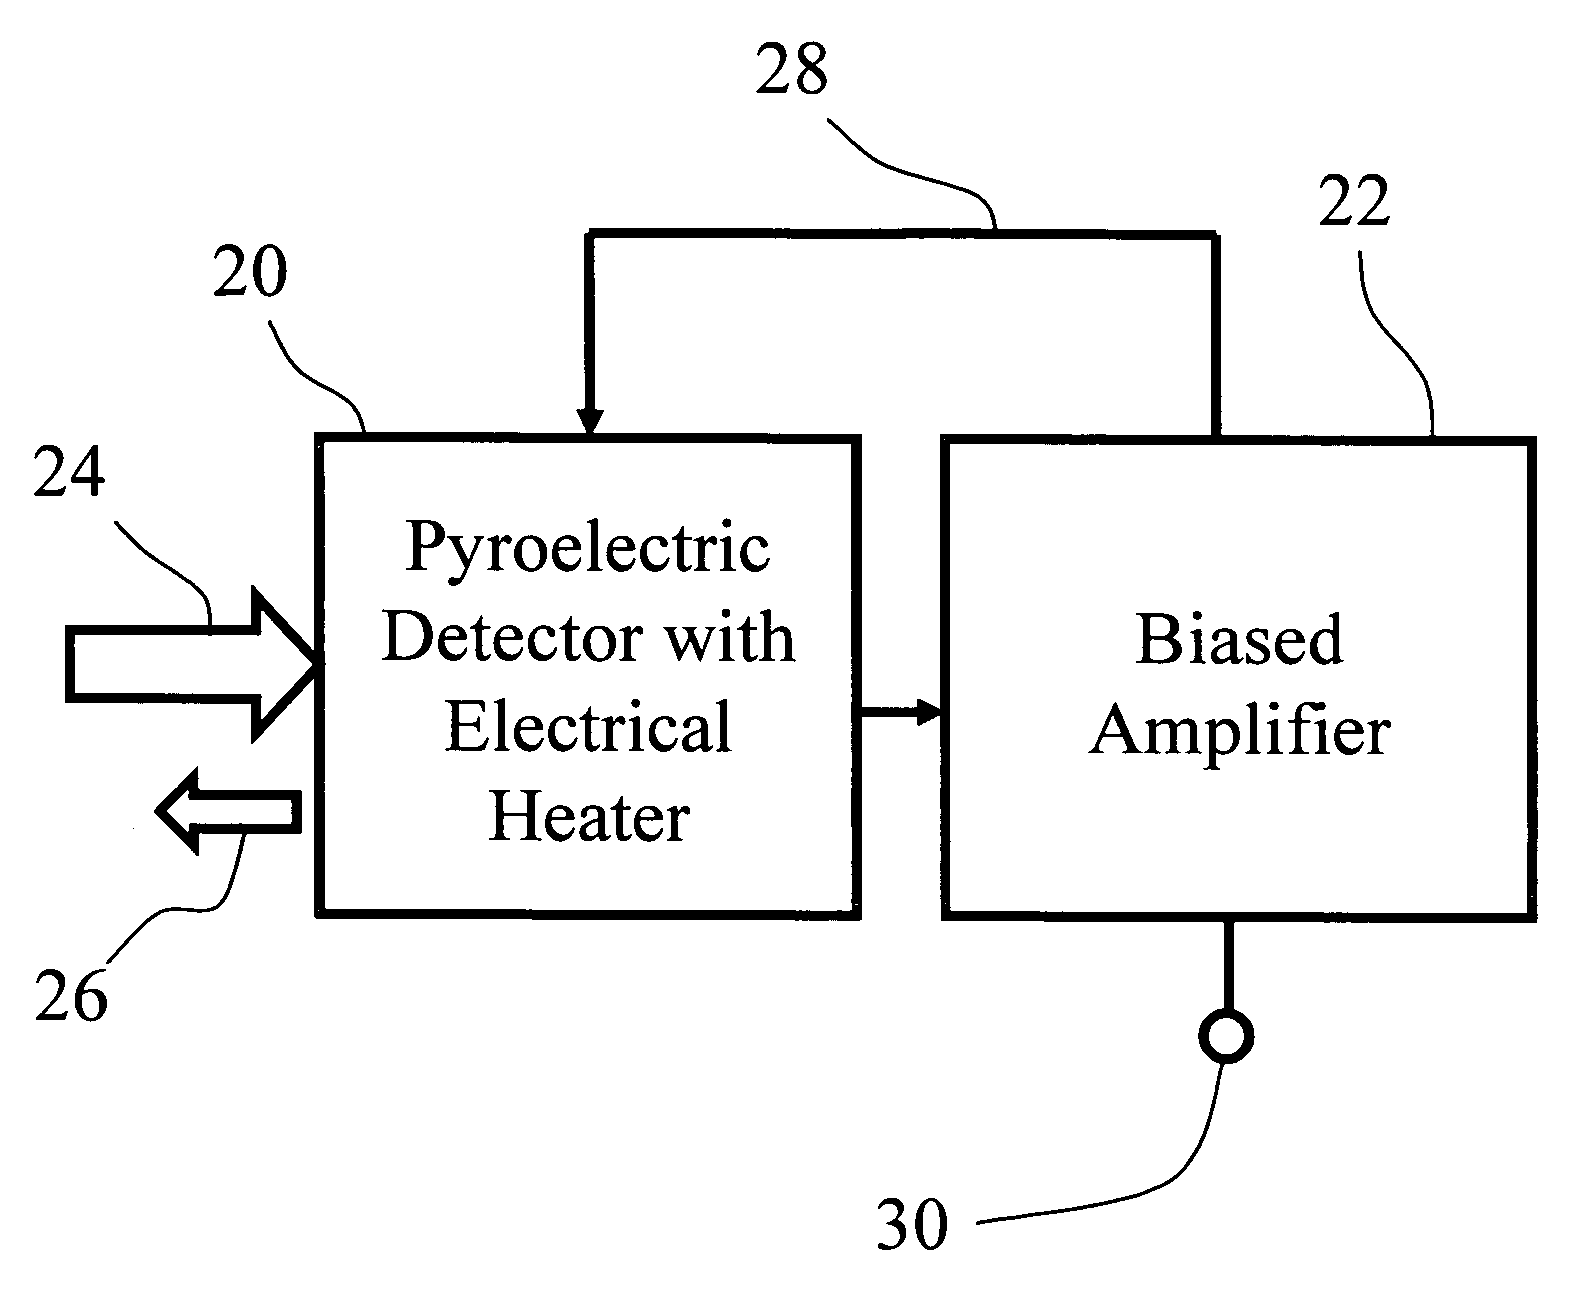 High fidelity electrically calibrated pyroelectric radiometer